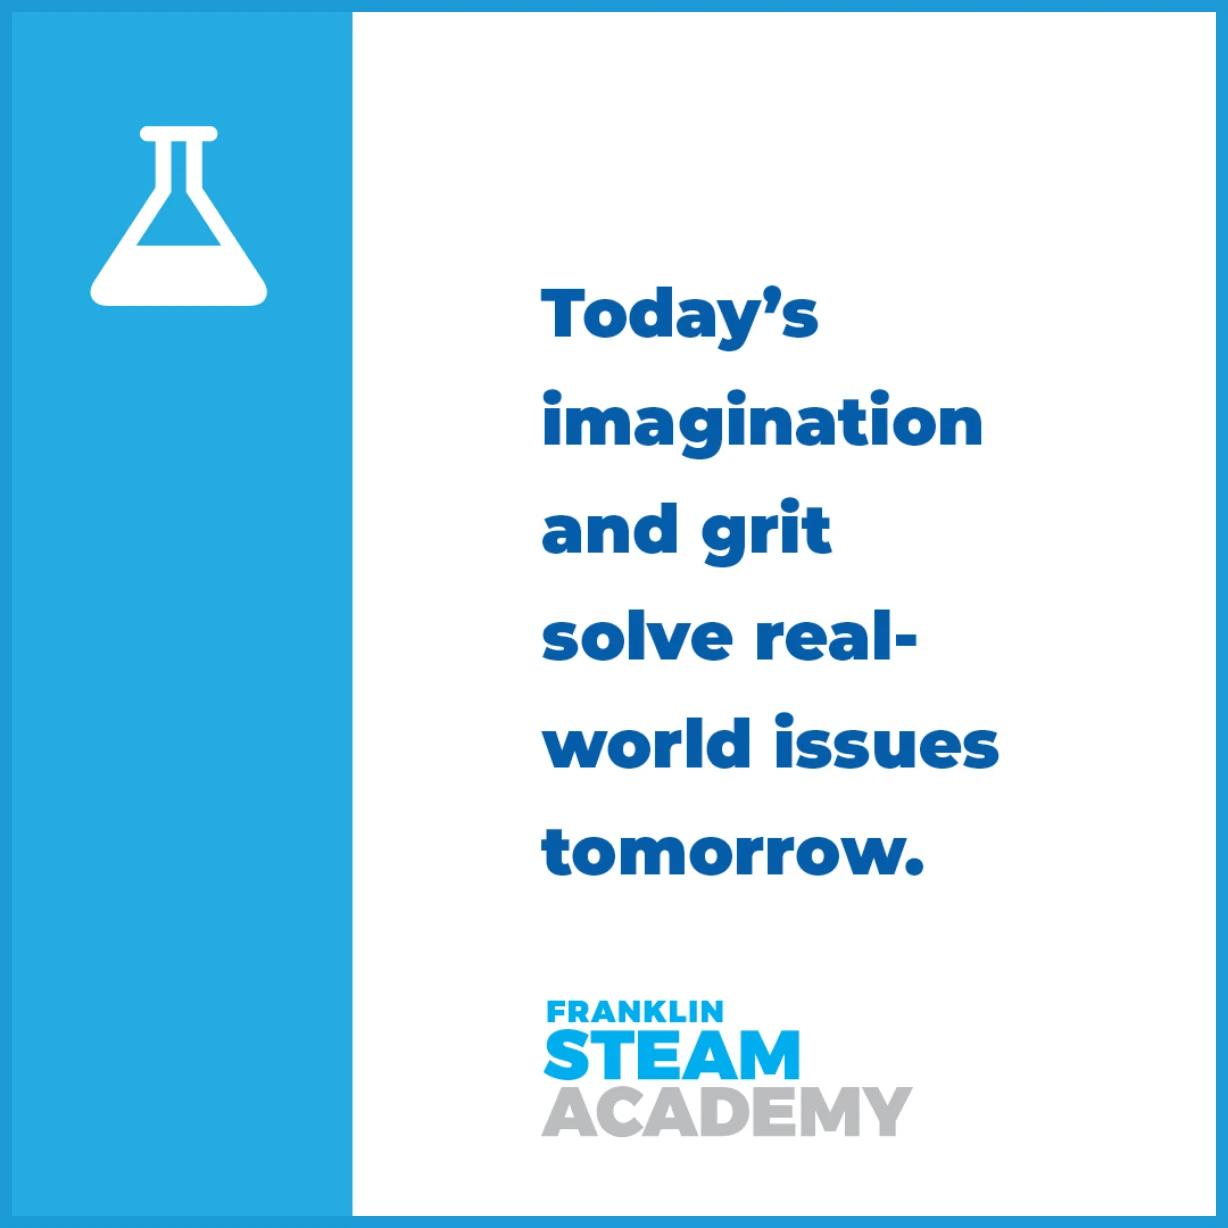 Today's imagination and grit to solve real world issues tomorrow.